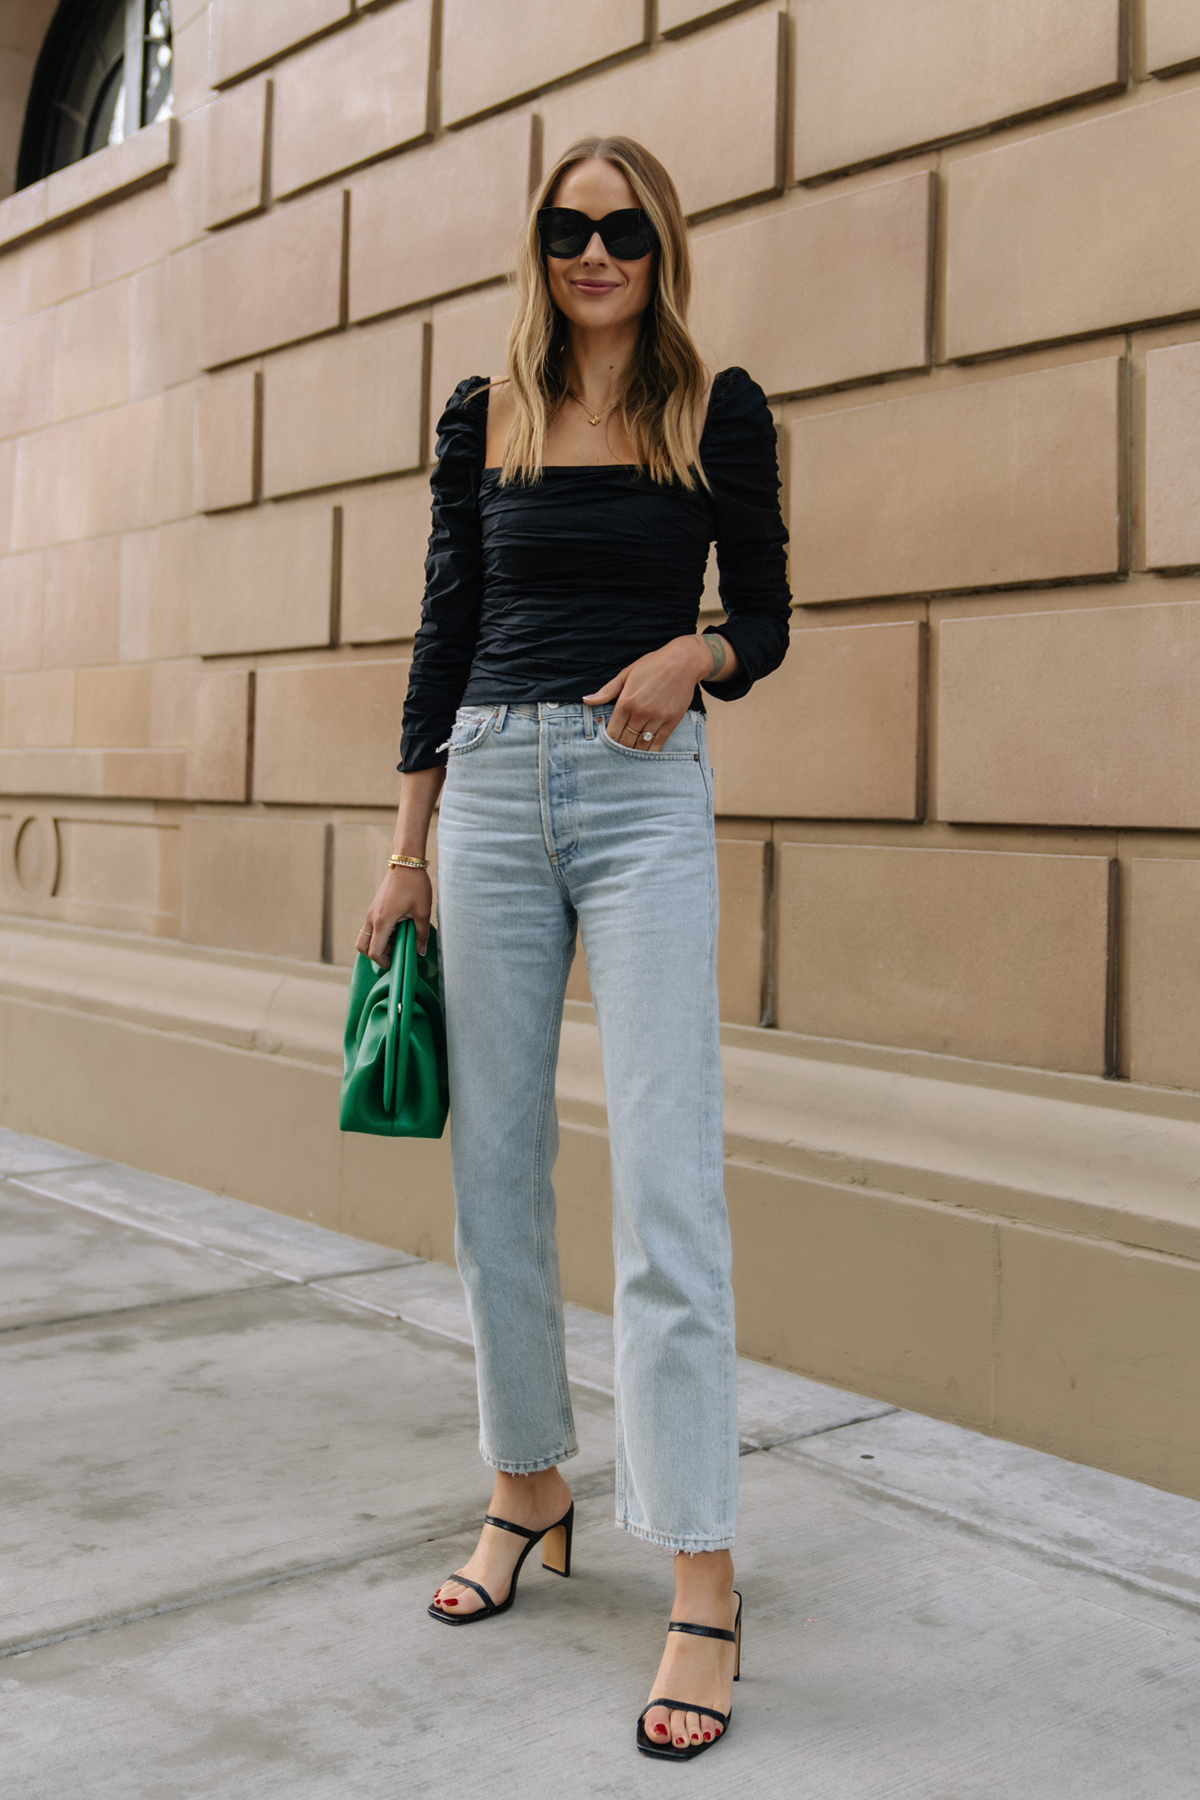 Fashion Jackson Wearing Black Rouched Reformation Top AGOLE 90s Loose Fit Jeans Black Heeled Sandals Green Clutch Spring Date Night Outfit